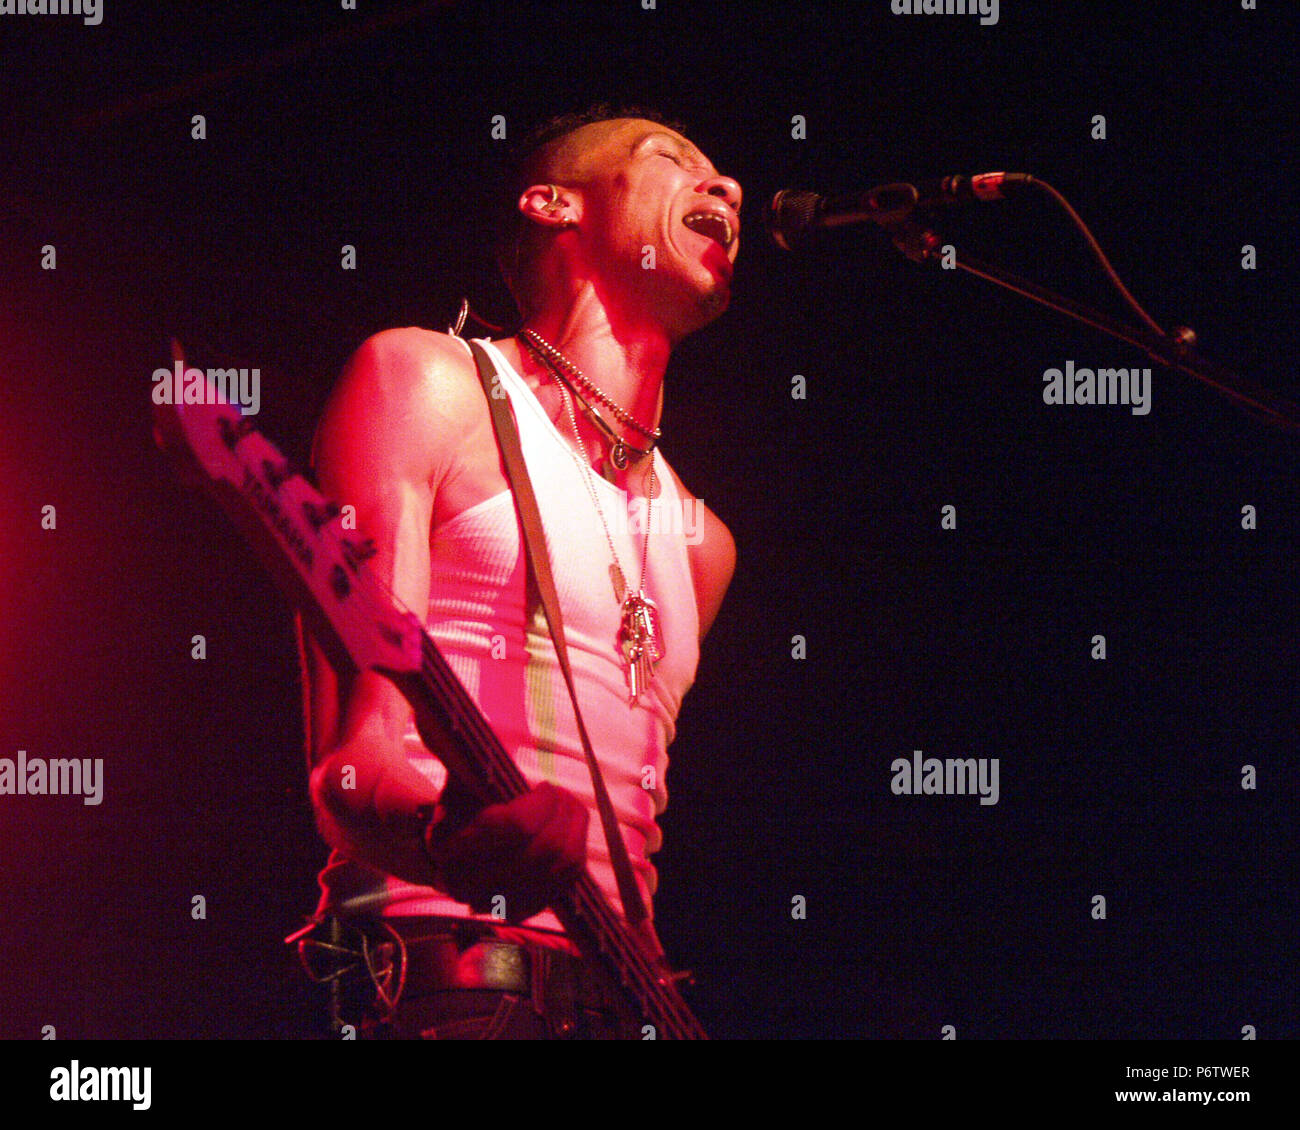 ATHENS, GA - January 31: Doug Pinnick of King's X performs at the 40 Watt Club in Athens, Georgia on January 31, 2002. CREDIT: Chris McKay / MediaPunch Stock Photo